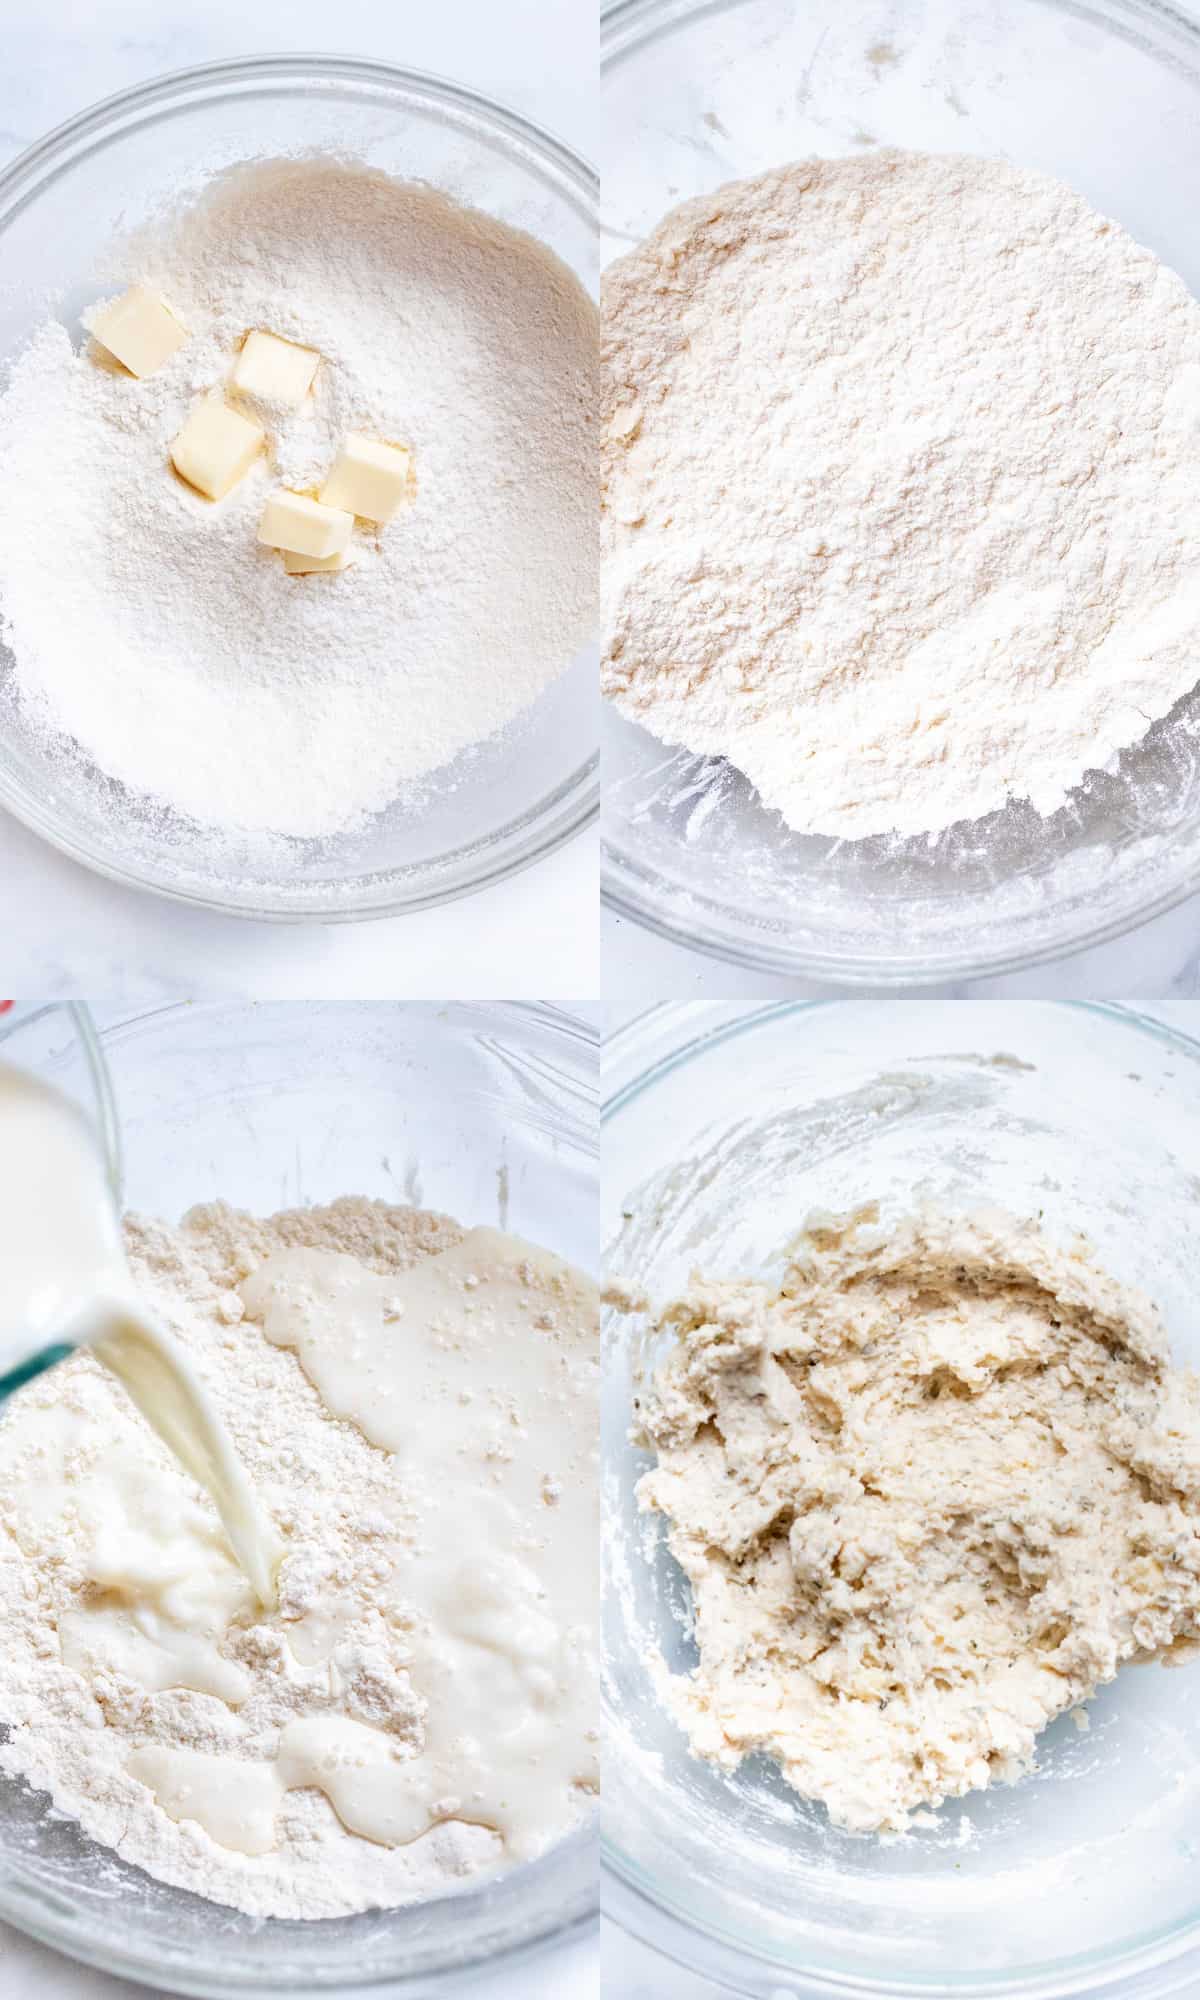 4 pics, one of sifted flour and cubed butter, all cut in, milk being poured in, and then mixed into a dough.